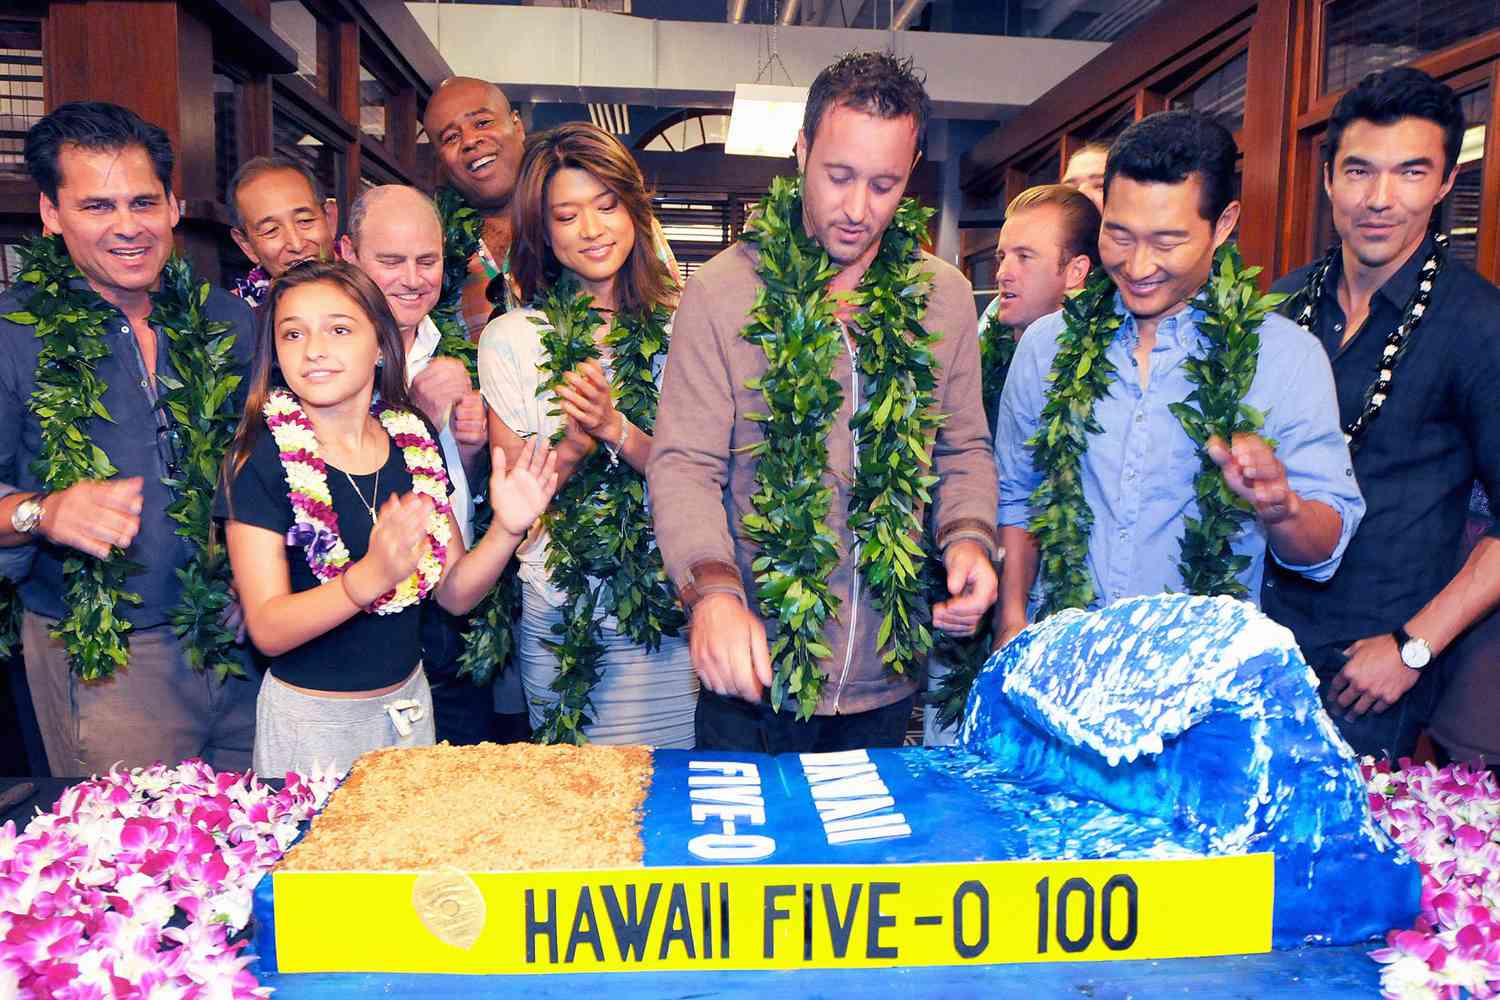 Hawaii Five-O's 100th episode